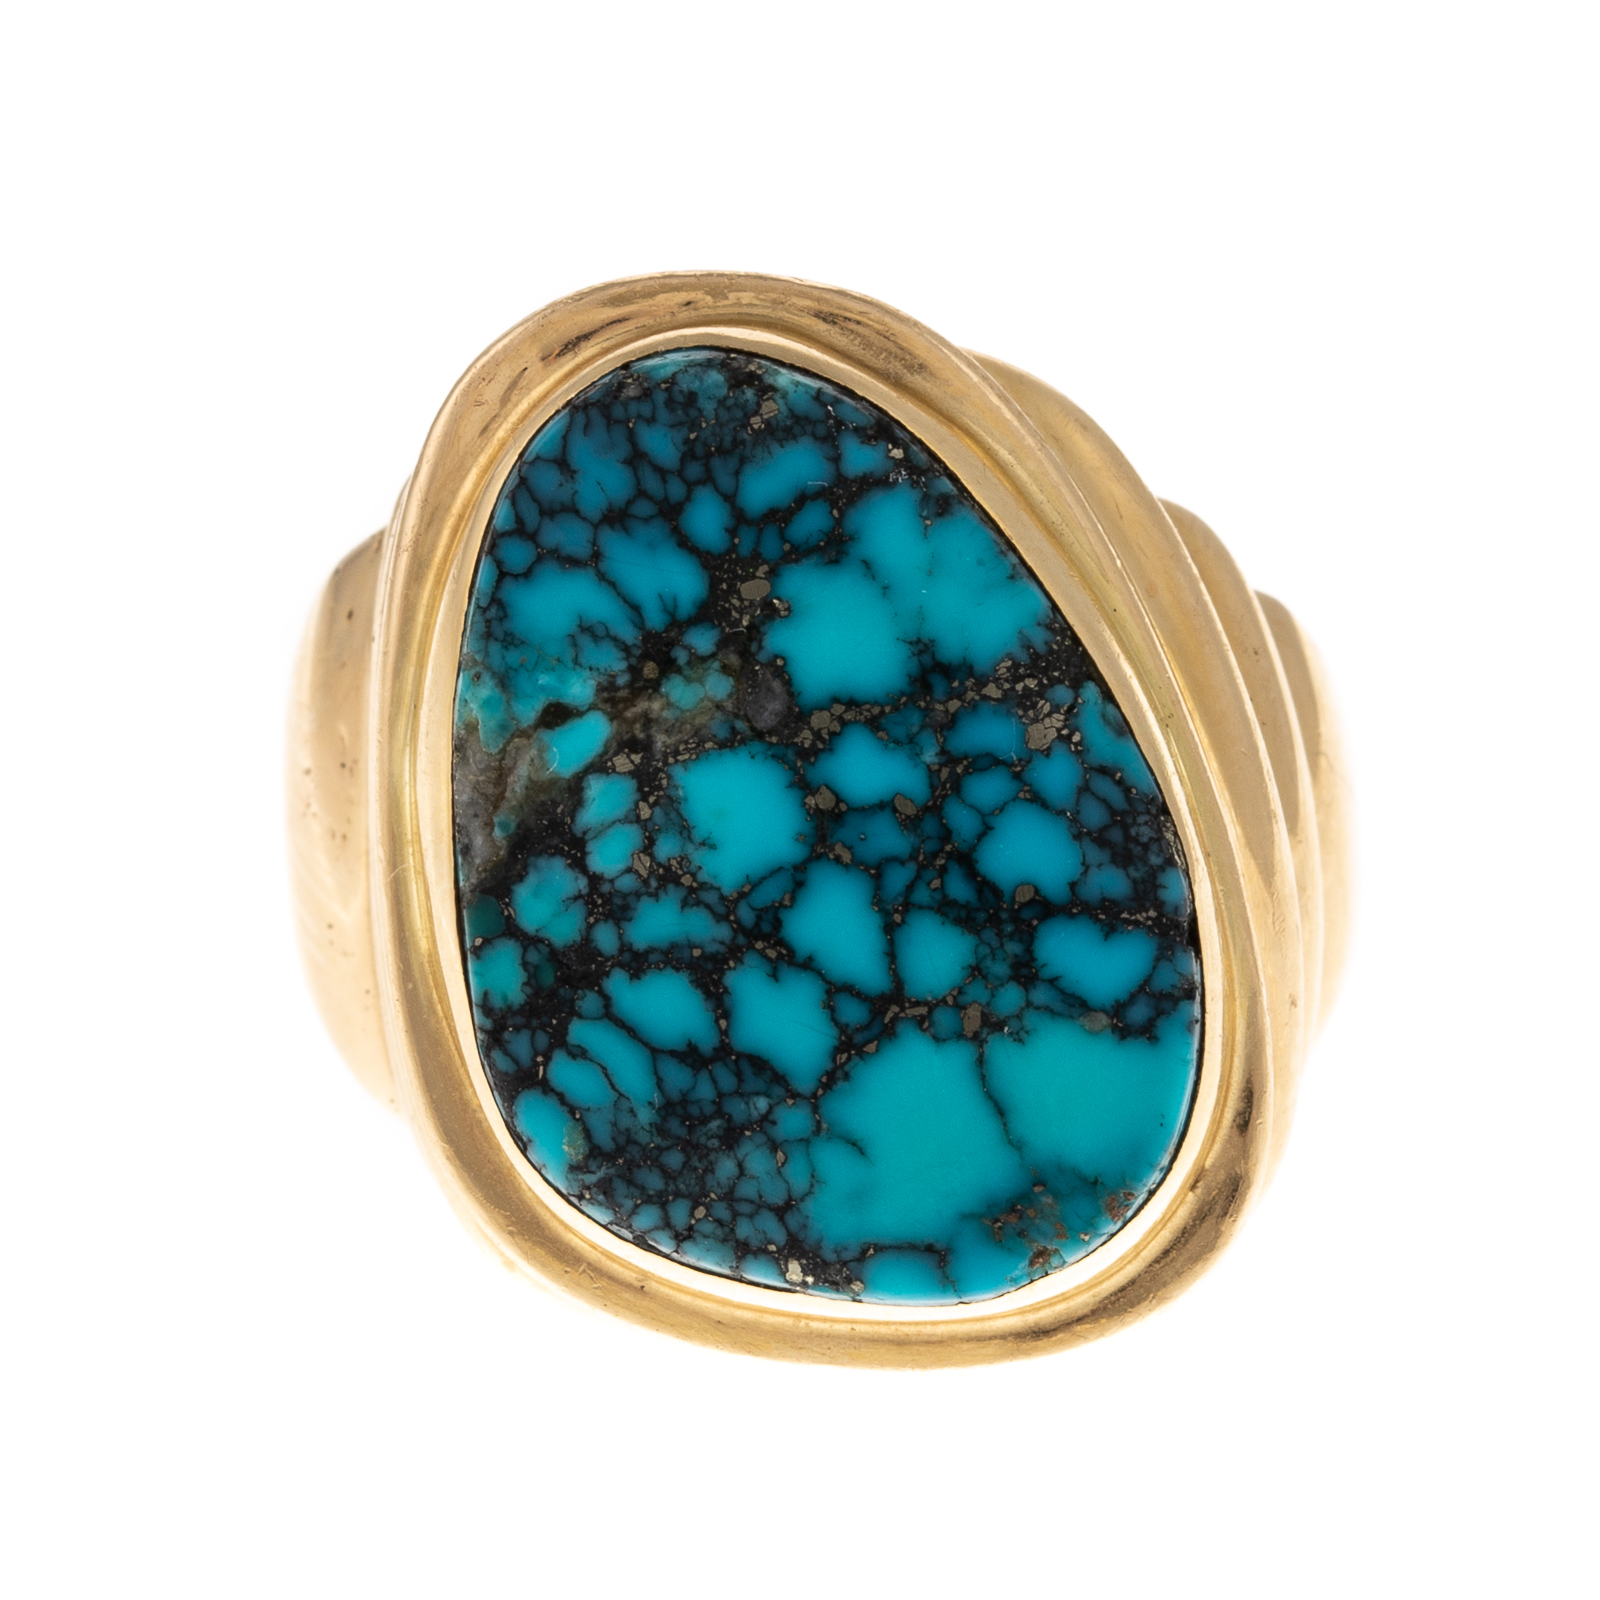 A 14K YELLOW GOLD TURQUOISE RING 29e001